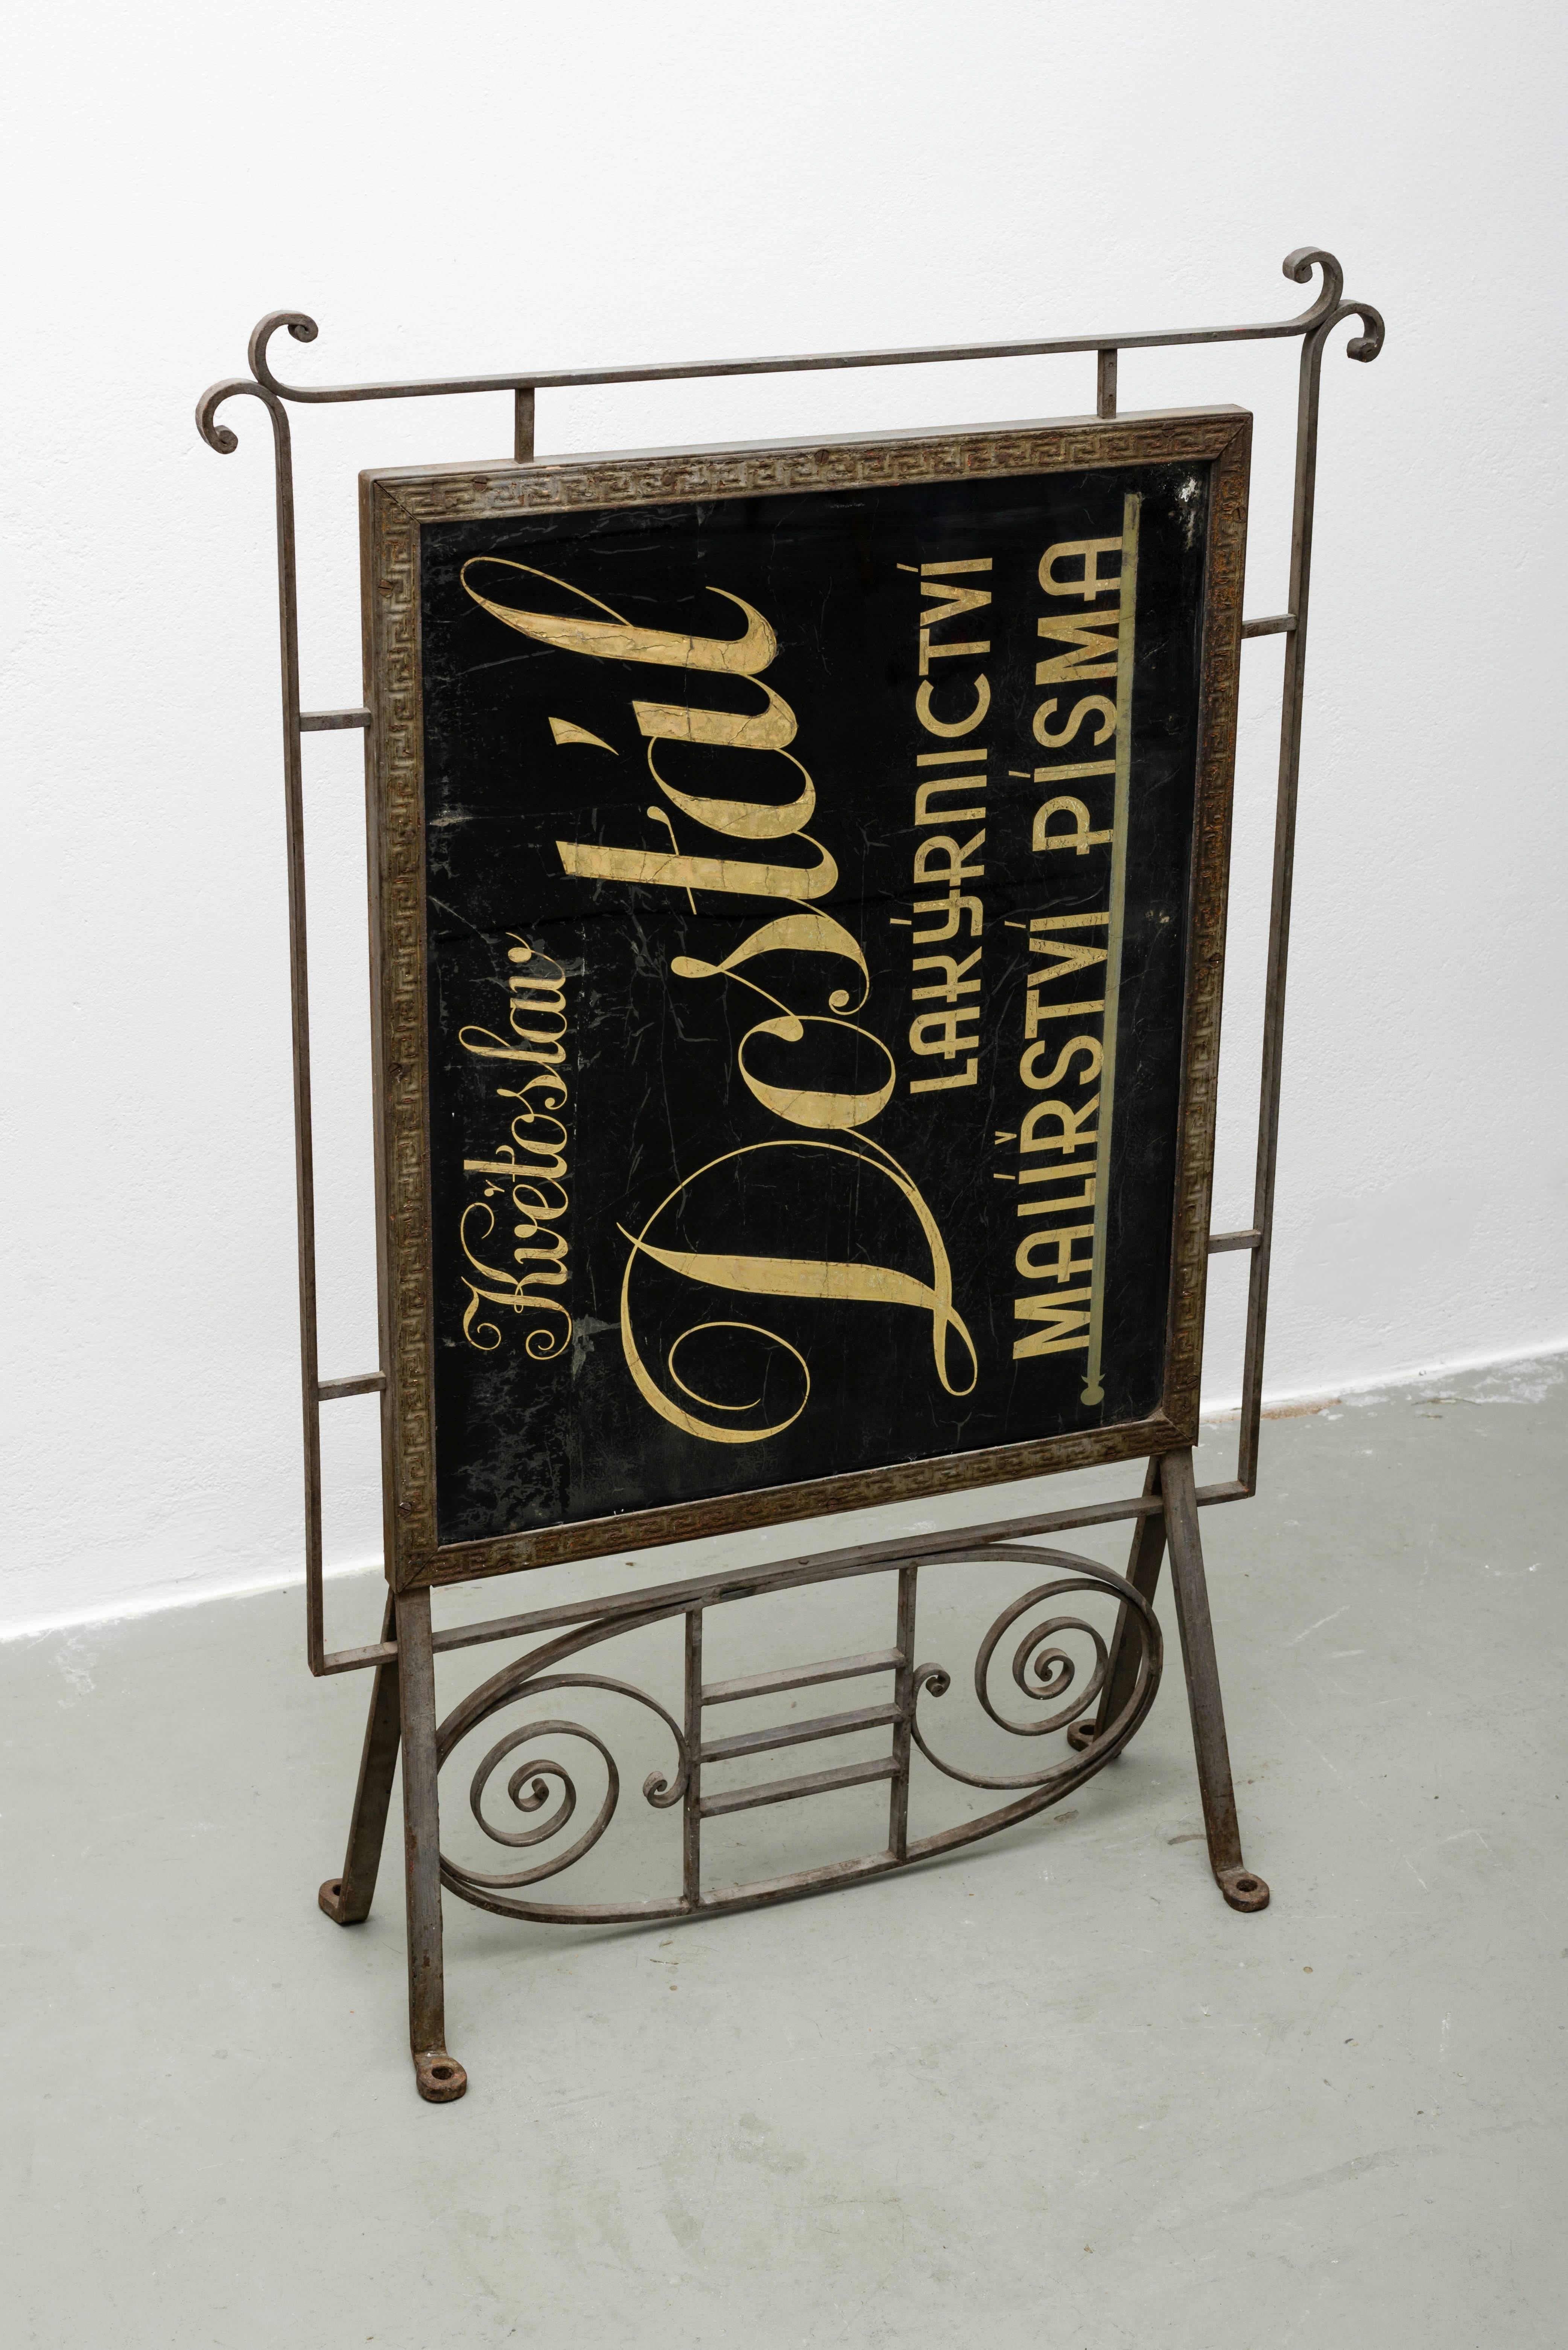 This vintage sign comes from the shop of Prague letter painter Kvetoslav Dostal. It was probably manufactured circa 1900, as the wrought iron frame construction shows Art Nouveau influences. The sign remains in a very good vintage condition with